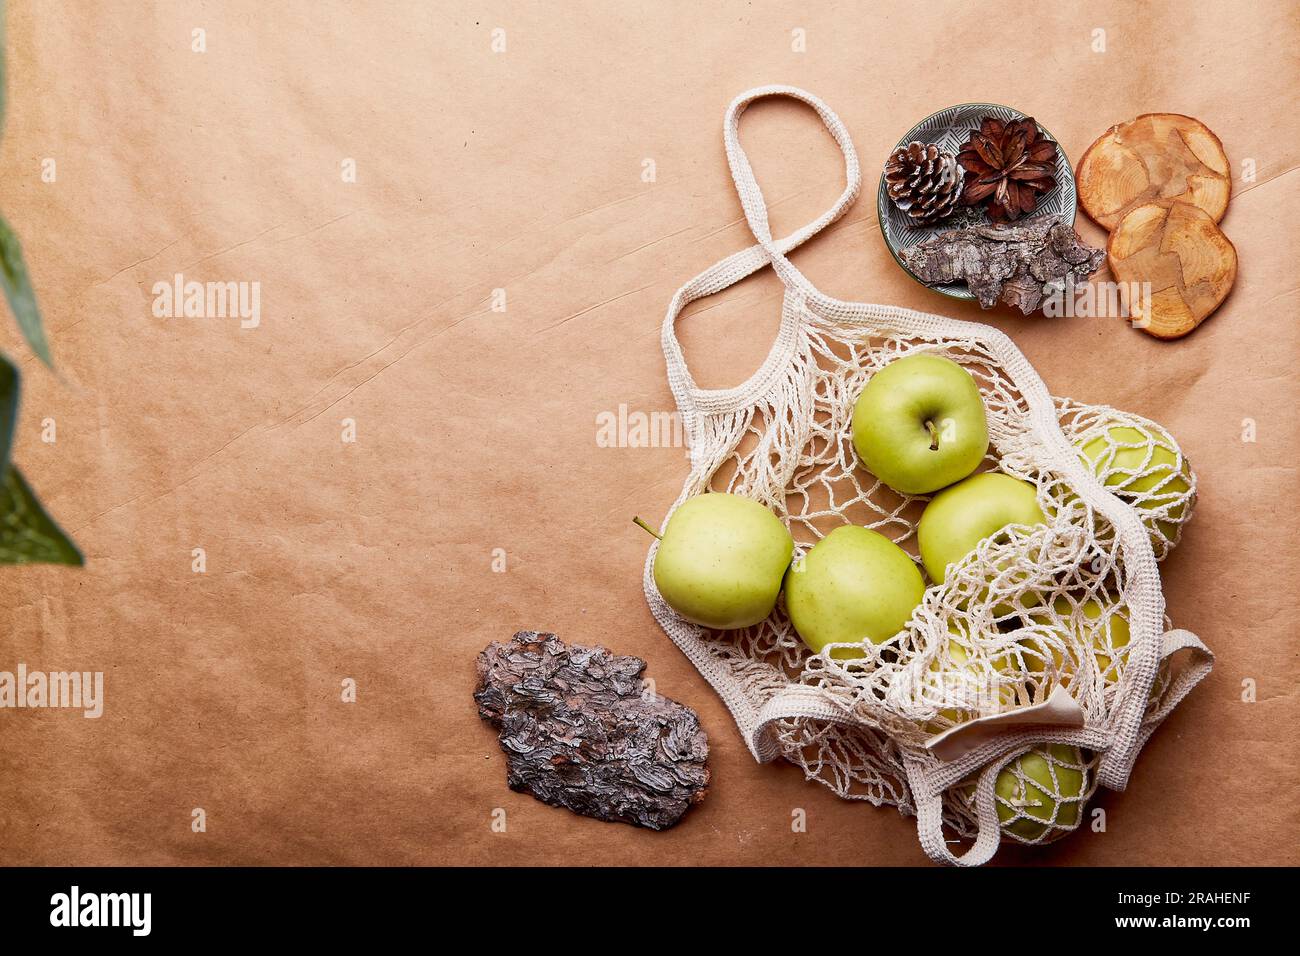 Eco-friendly, zero waste, sustainable lifestyle flat lay with copy space. Natural background with tree bark and apples on crafting paper Stock Photo